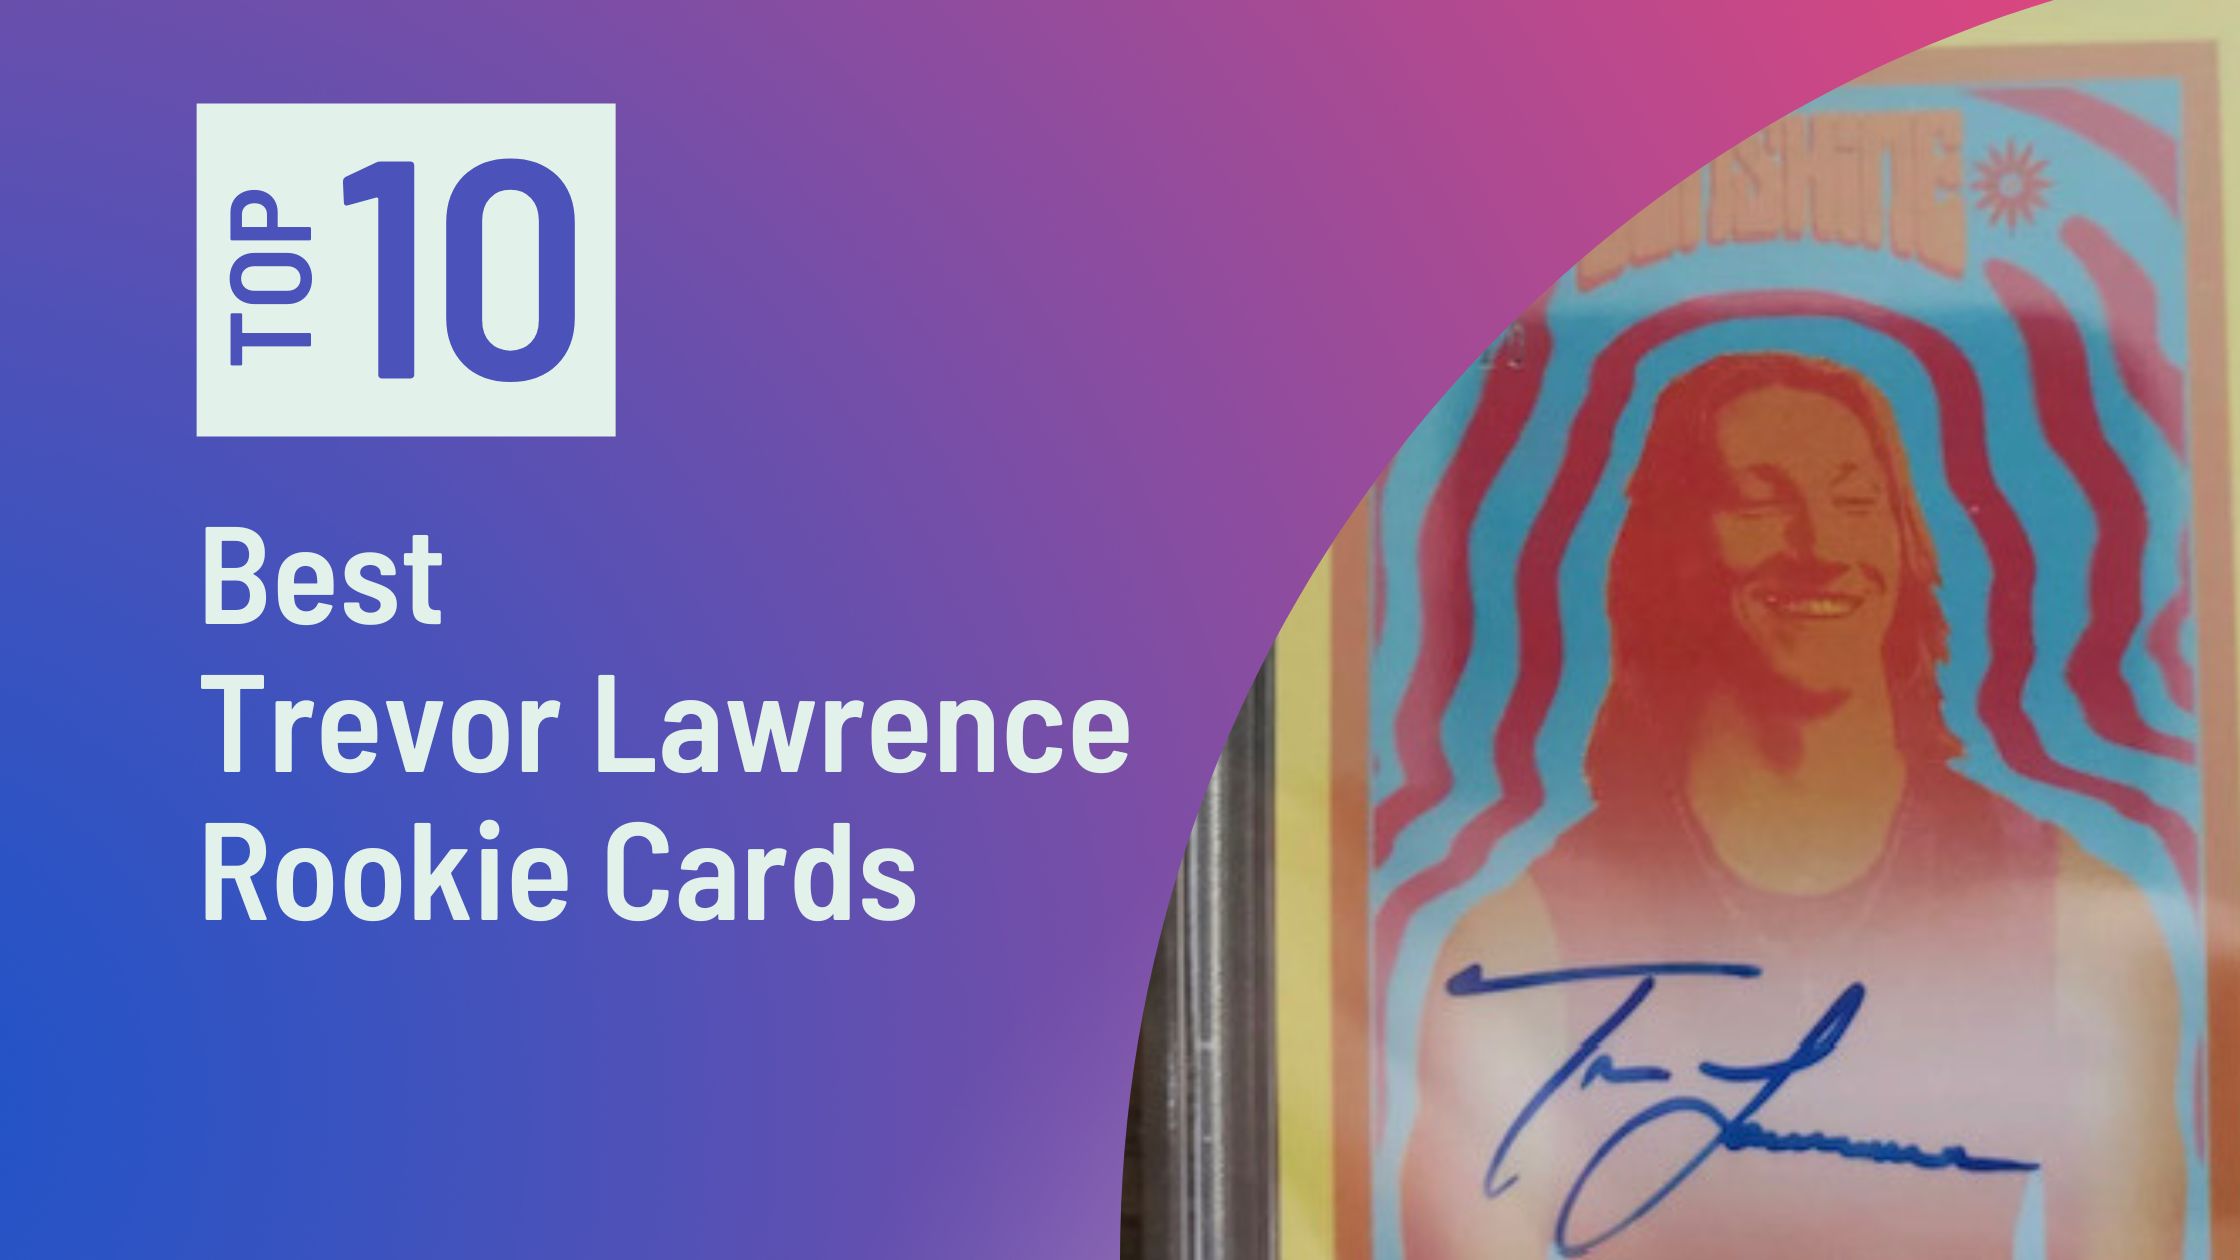 Featured image for the Best Trevor Lawrence Rookie Cards blog post on Sports Card Sharks